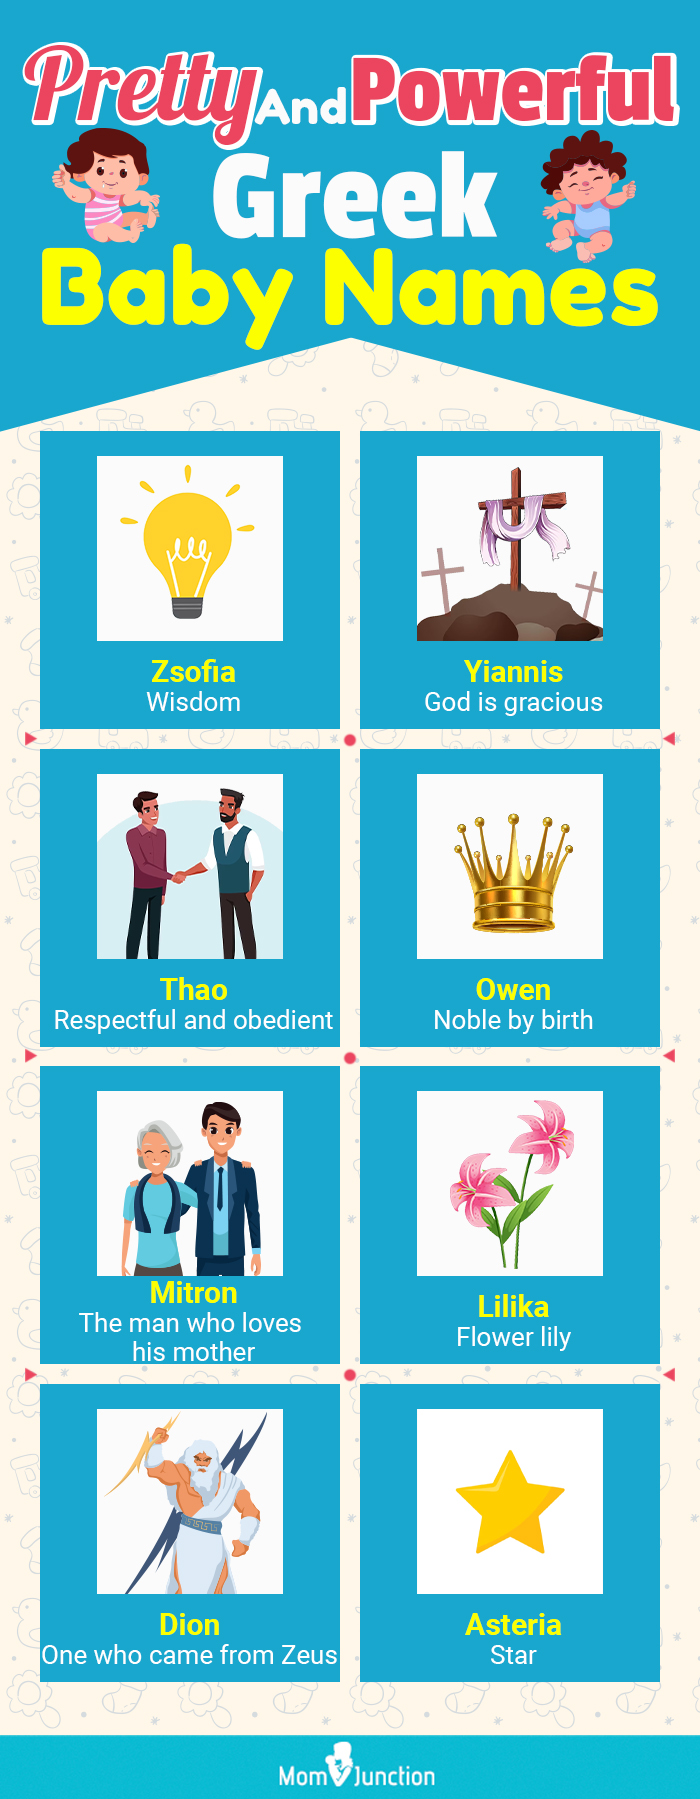 pretty and powerful greek baby names (infographic)